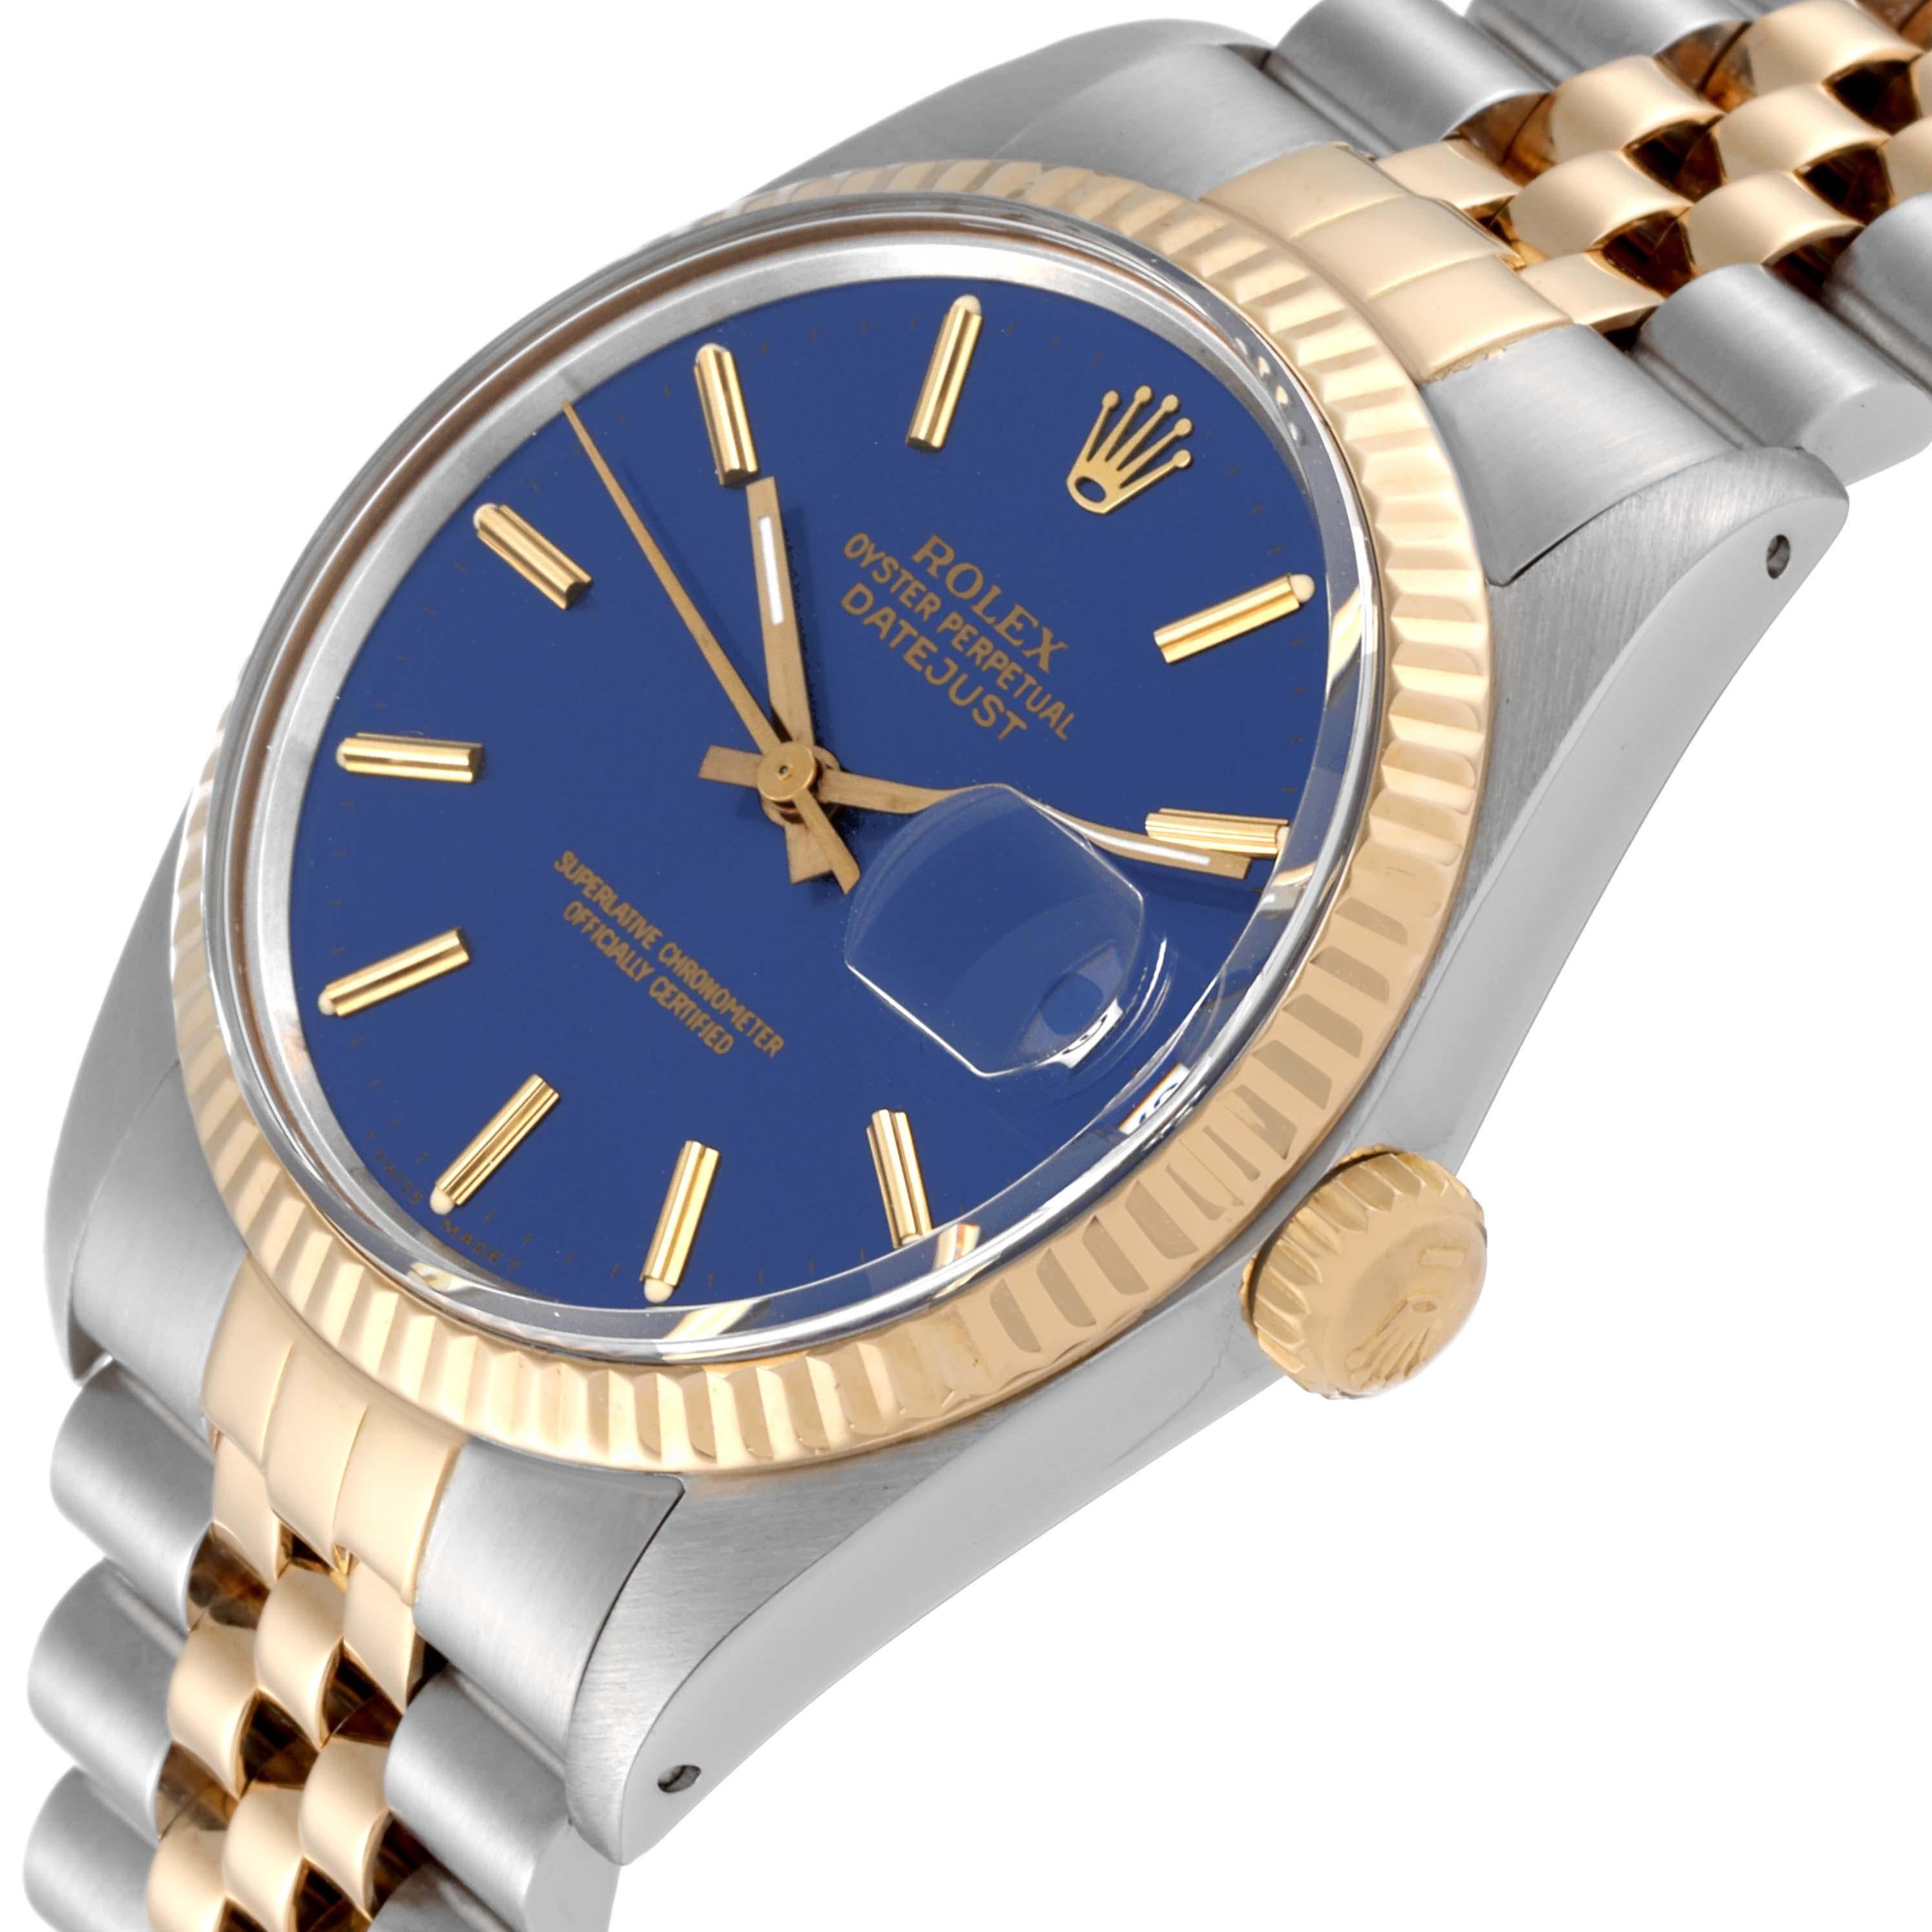 Rolex Datejust Steel Yellow Gold Blue Dial Vintage Mens Watch 16013 Box Papers 1